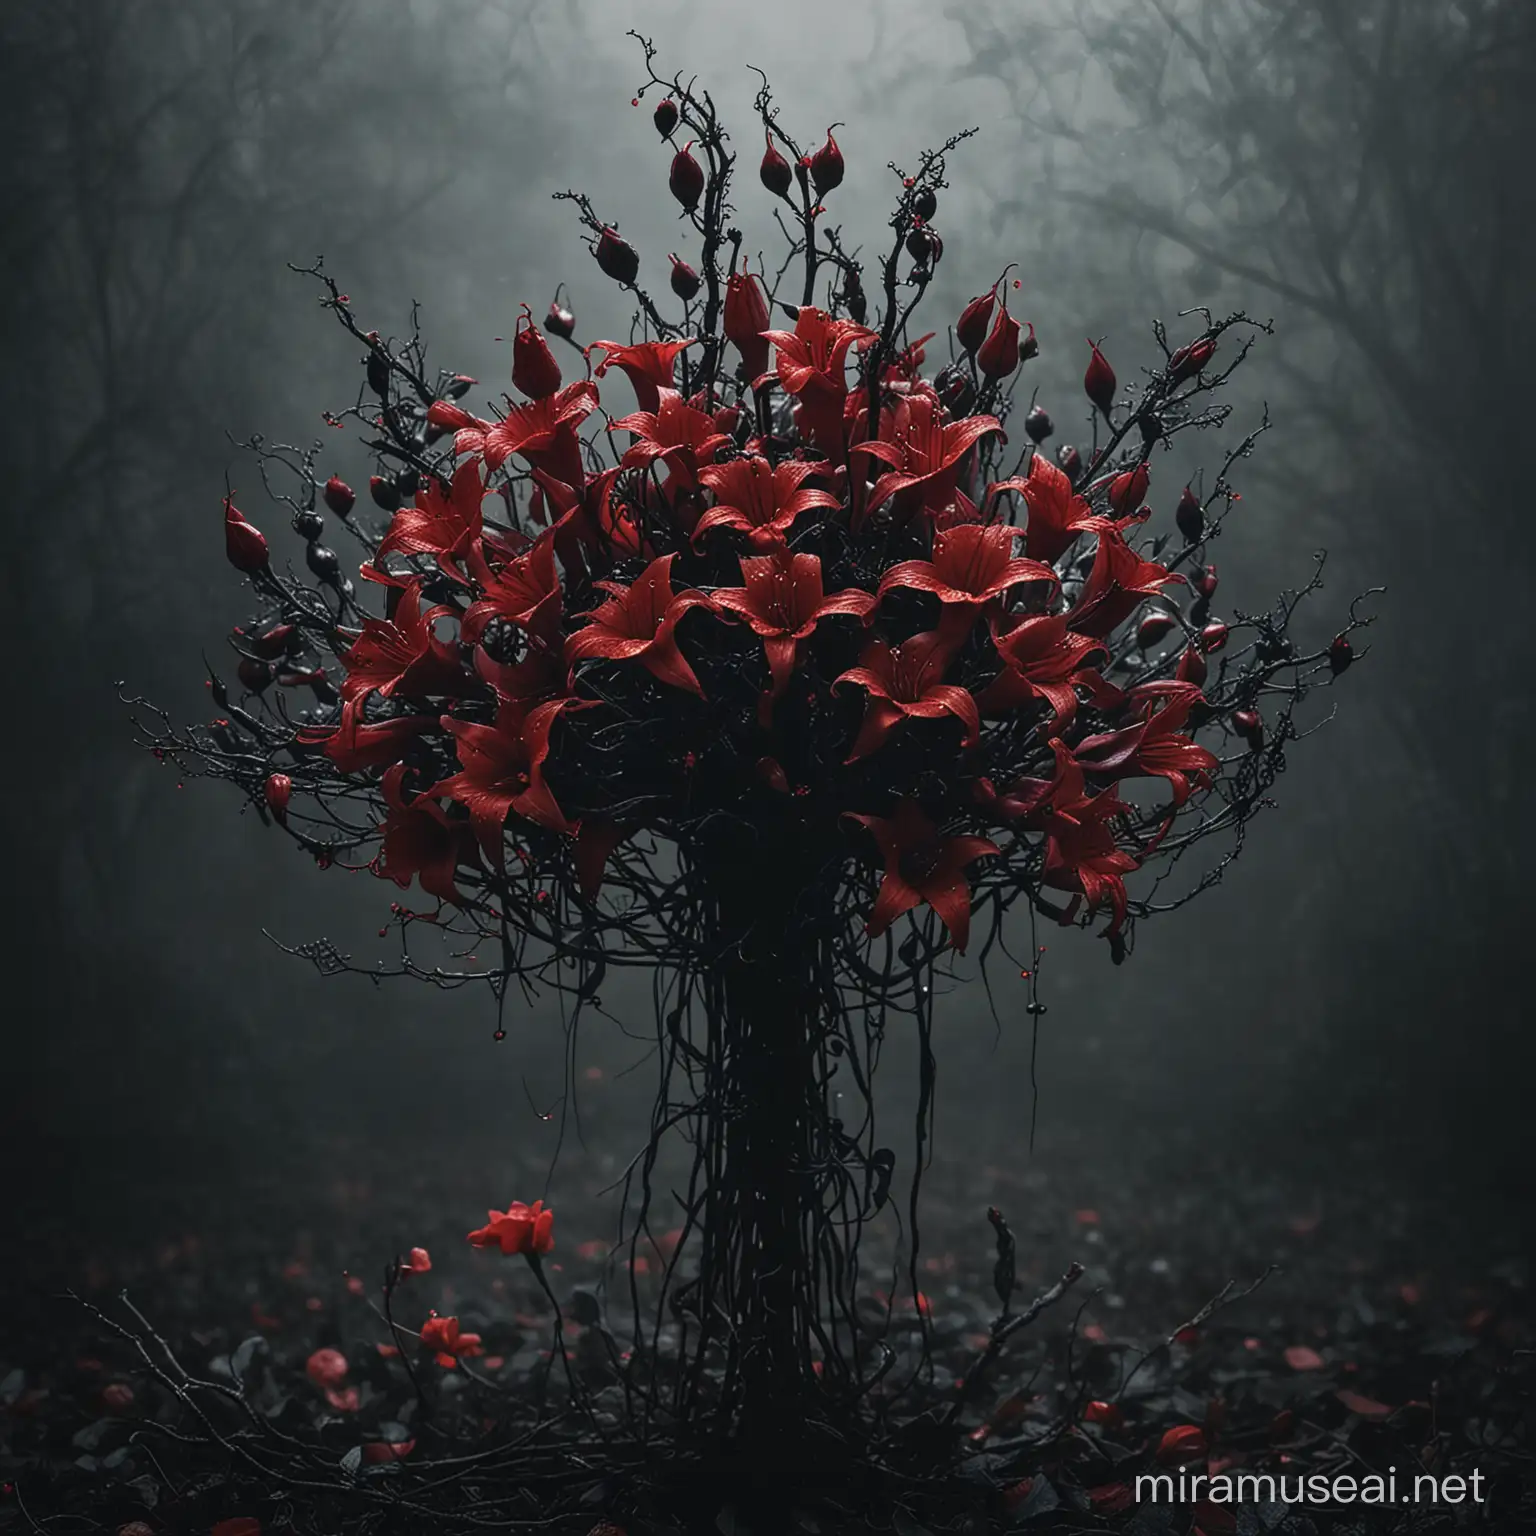 A sinisterly beautiful Devil's flower bouquet, each bloom oozing with malevolent allure. The delicate petals are a deep shade of crimson, contrasting against the glossy black thorns that snake up their stems. The arrangement is set against a backdrop of swirling mist, giving it an otherworldly and haunting quality. This haunting image is a high-quality, surreal and captivating photograph that captures the dark beauty of these devilish flowers.